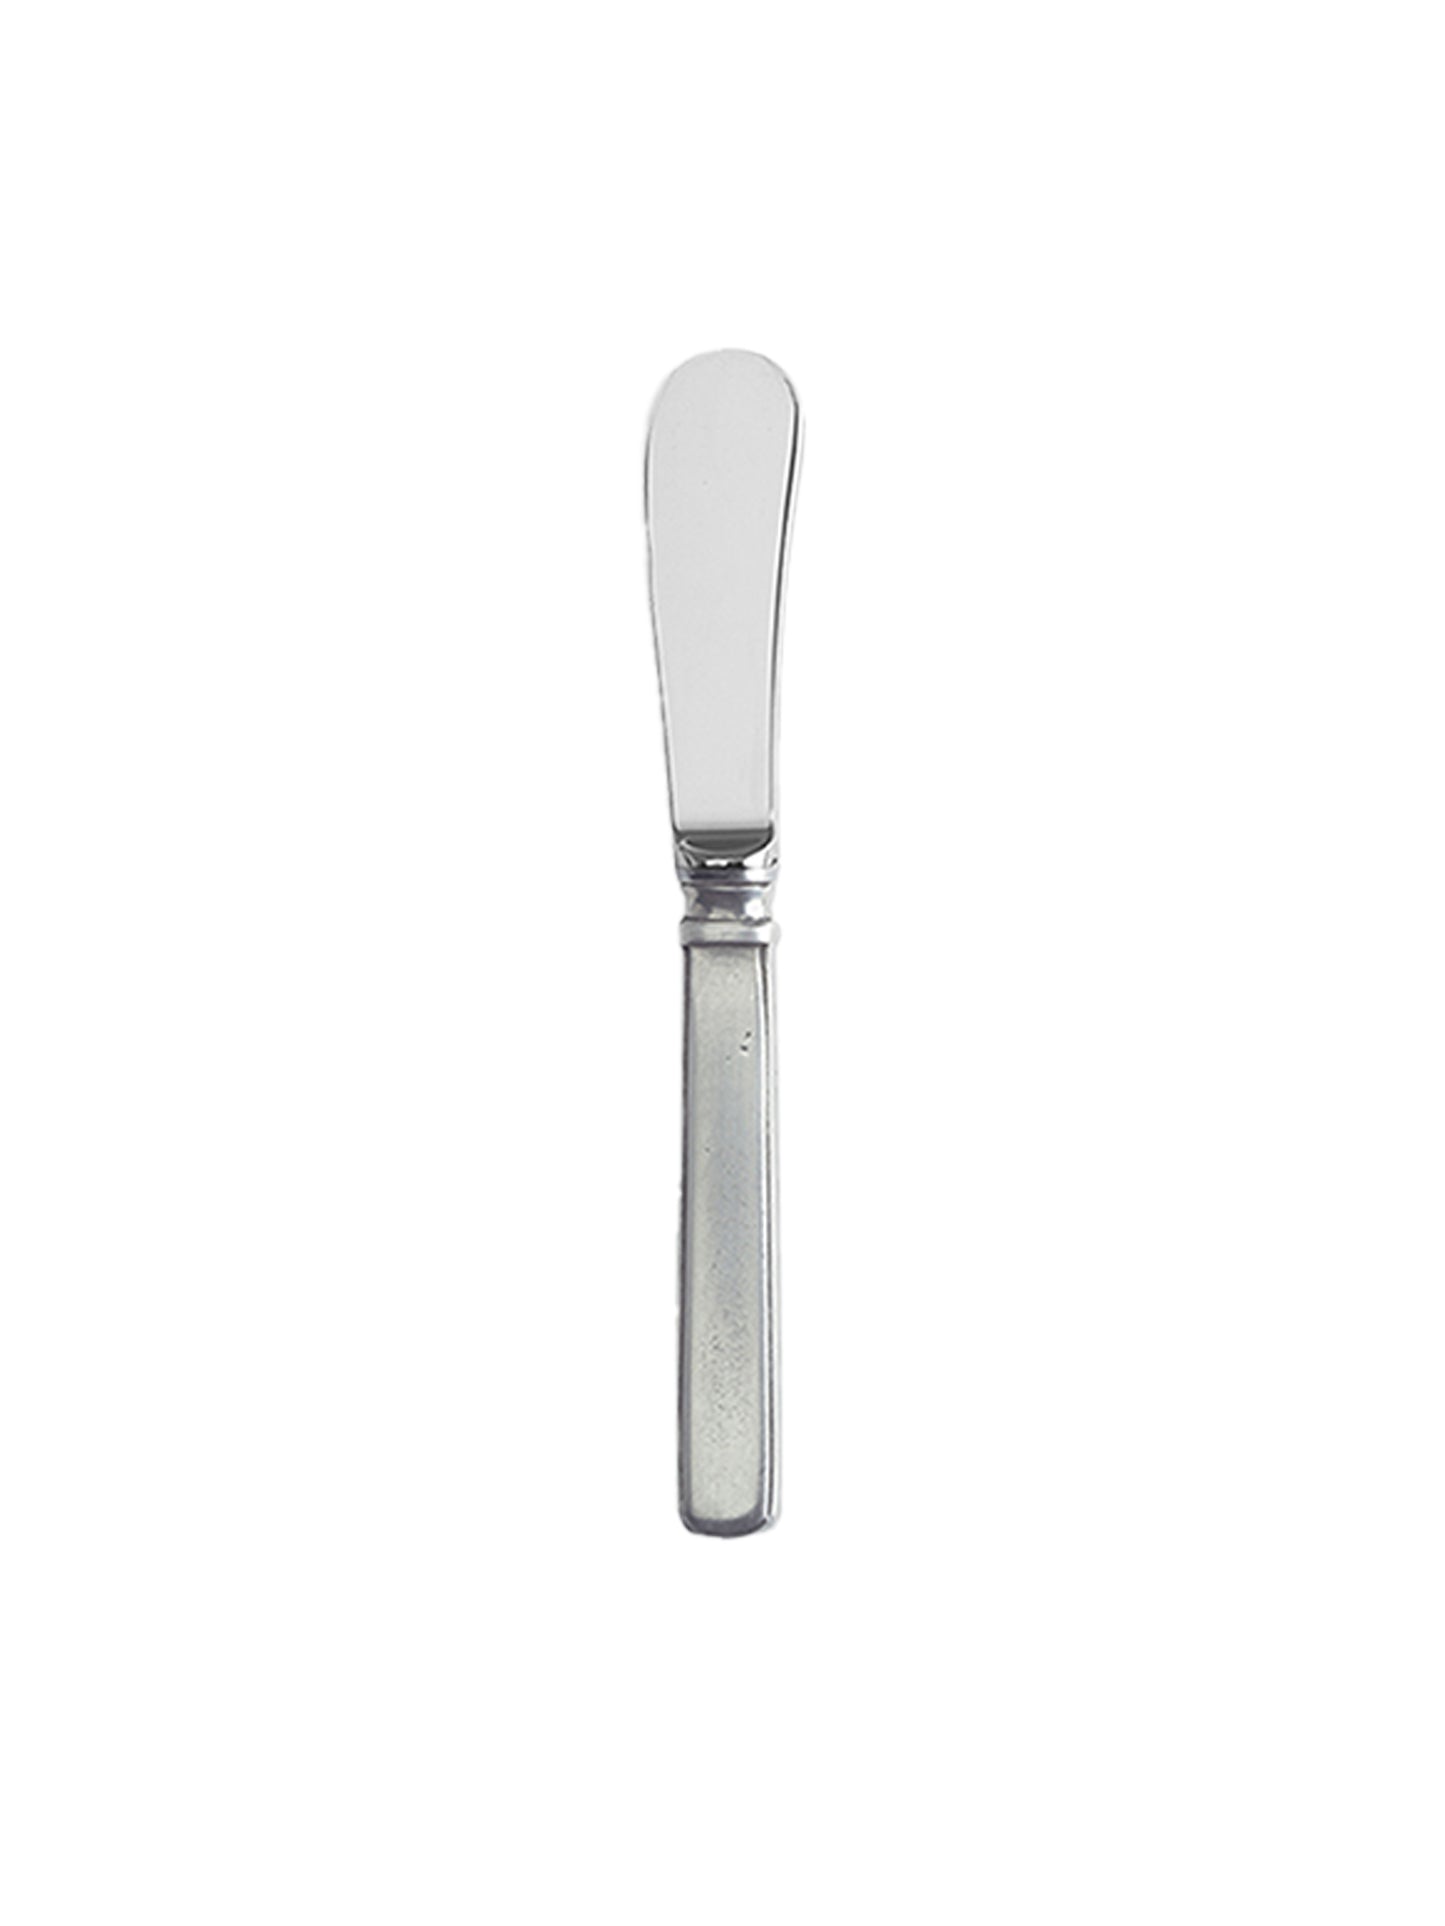 MATCH Pewter Gabriella Butter Knife Weston Table